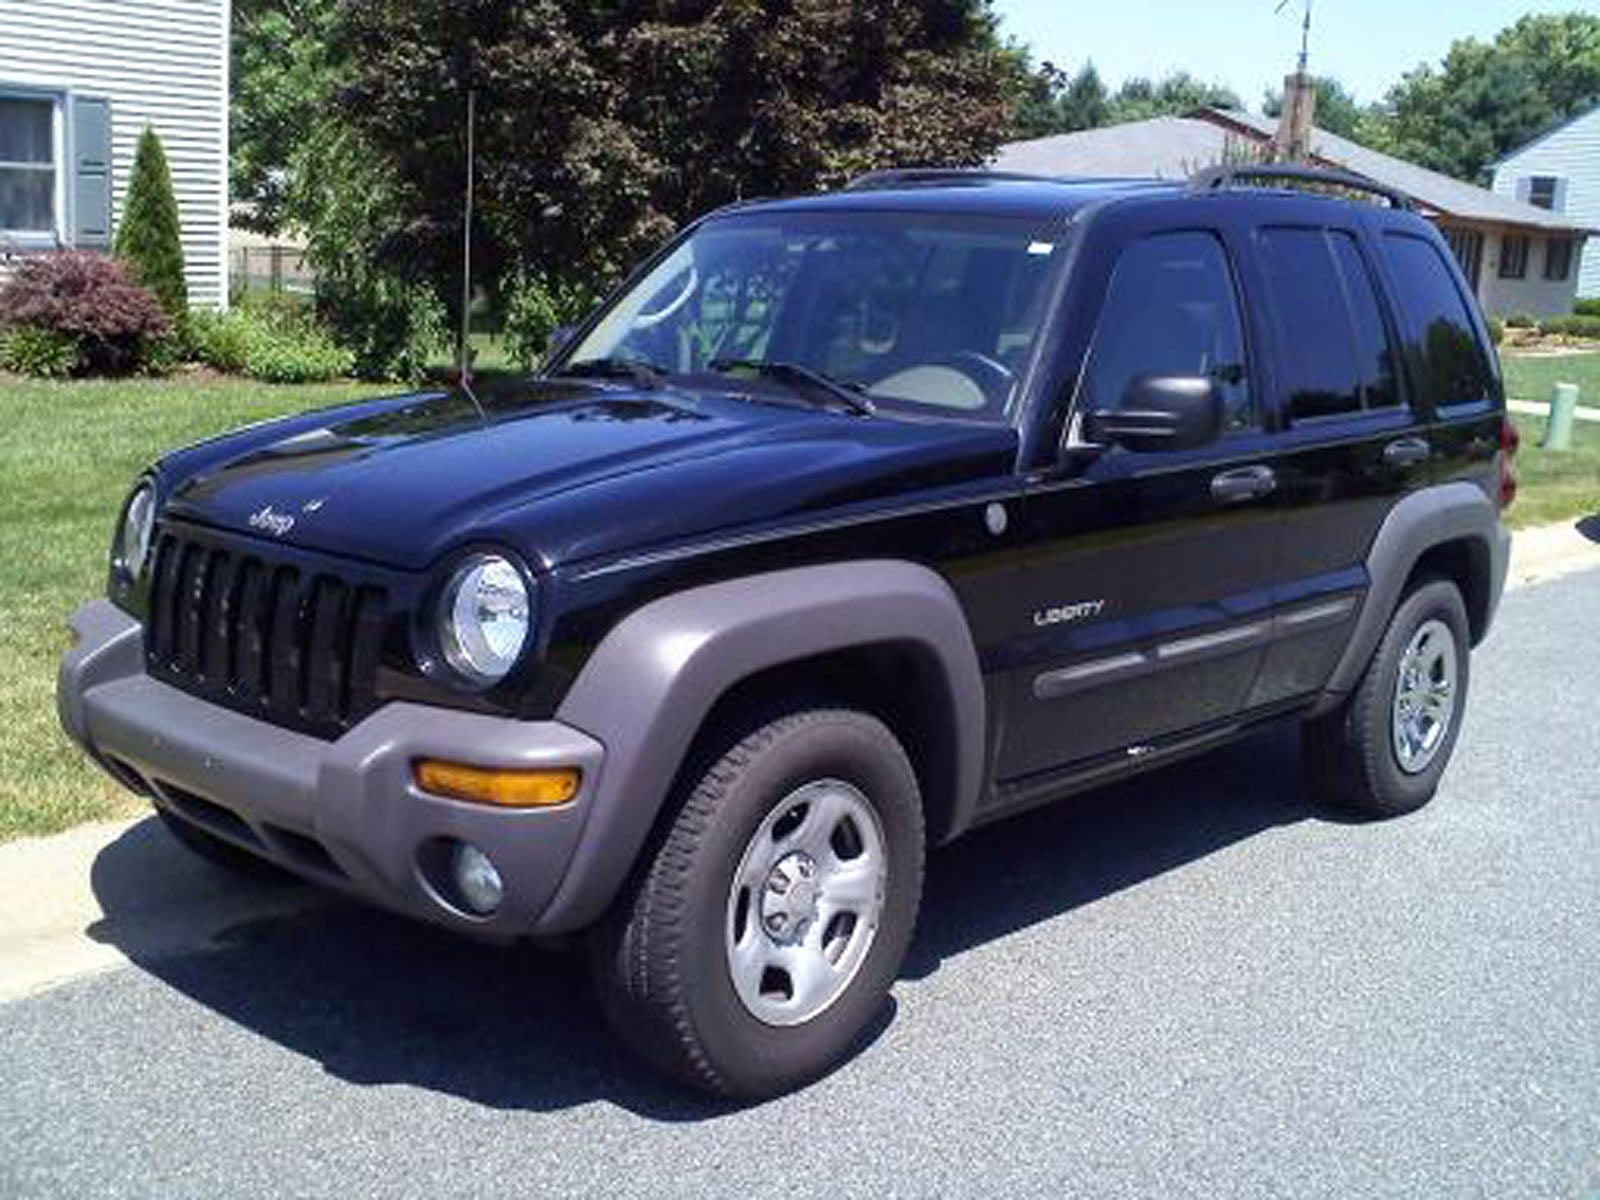 03 Jeep liberty sport owners manual #4